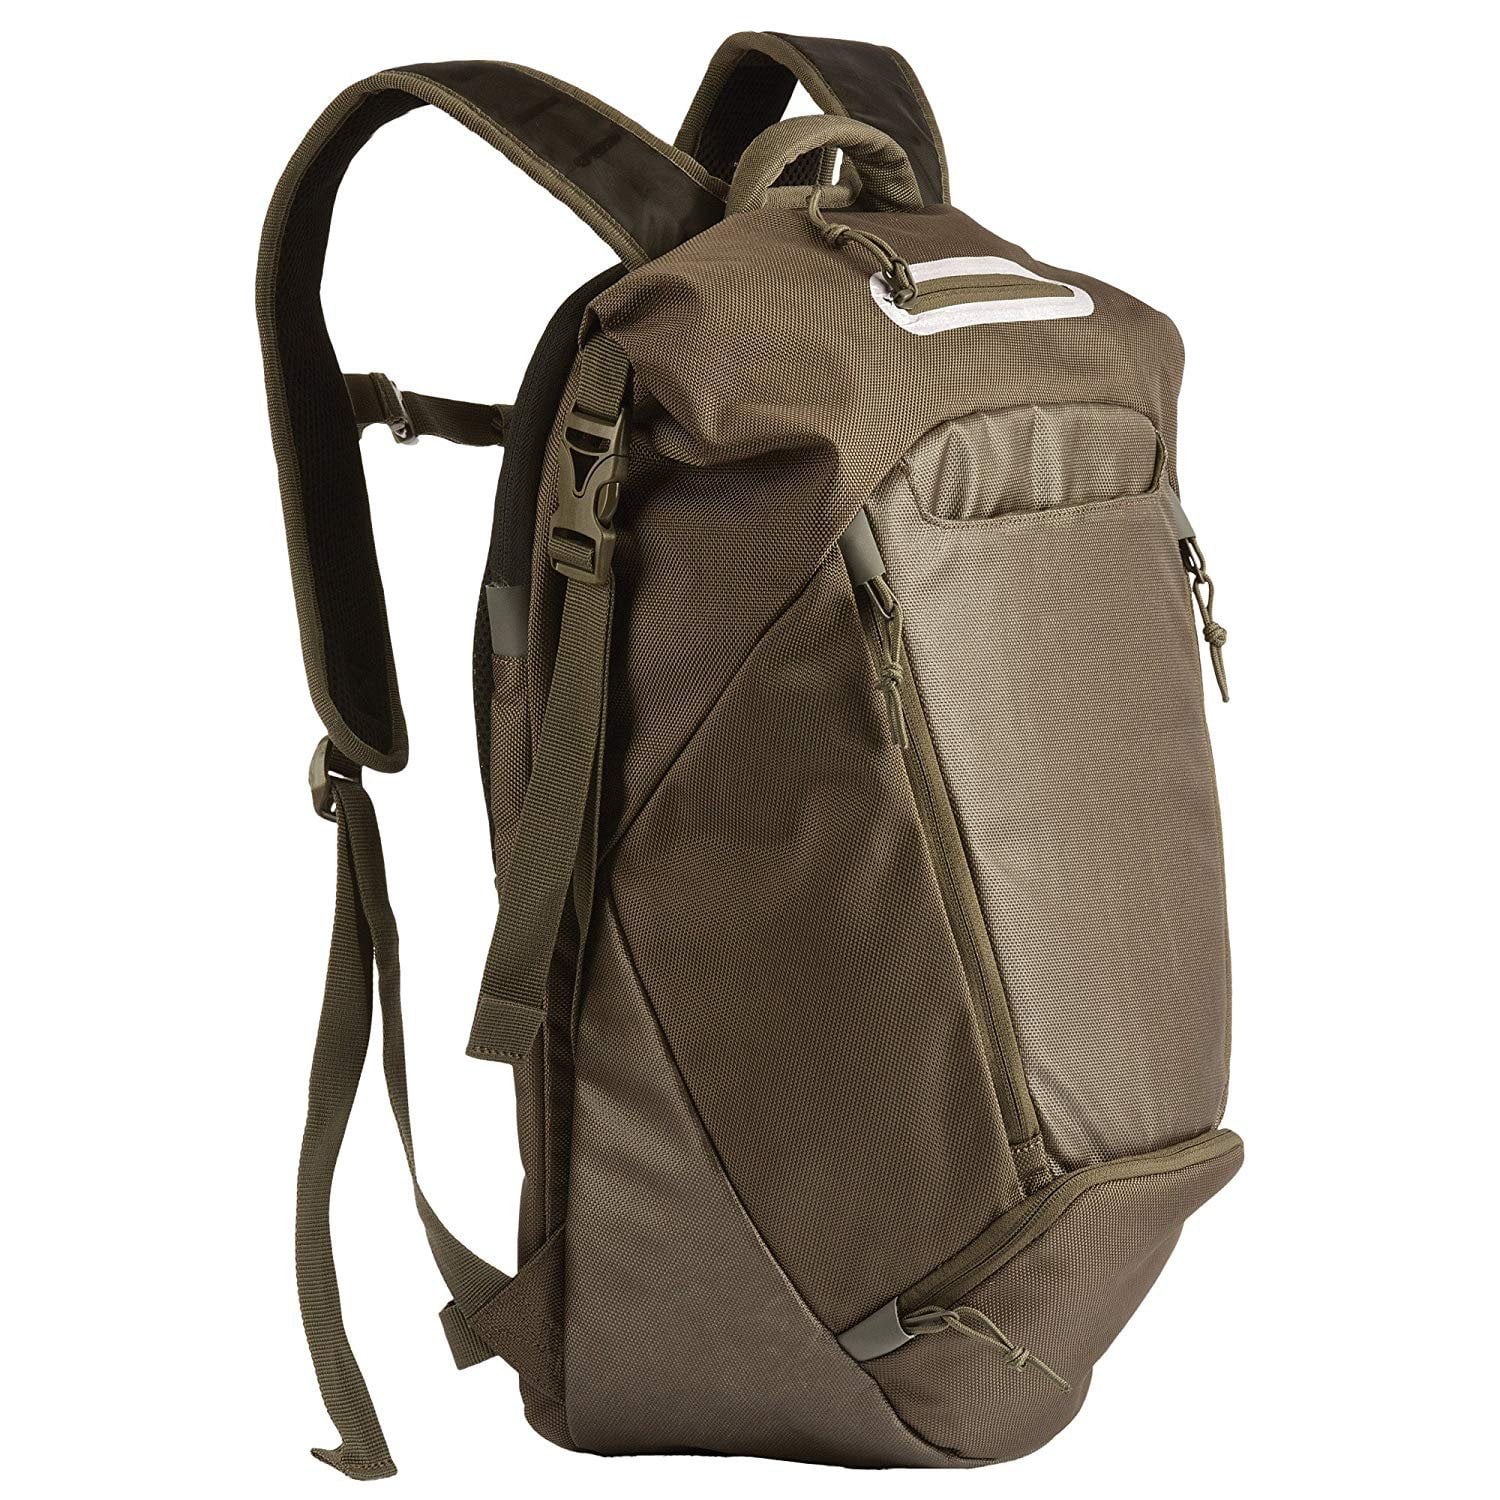 5.11 Tactical Covert Boxpack, 1680D Ballistic Polyester, Water Resistant  Finish, 32L, Tundra, Style 56284 